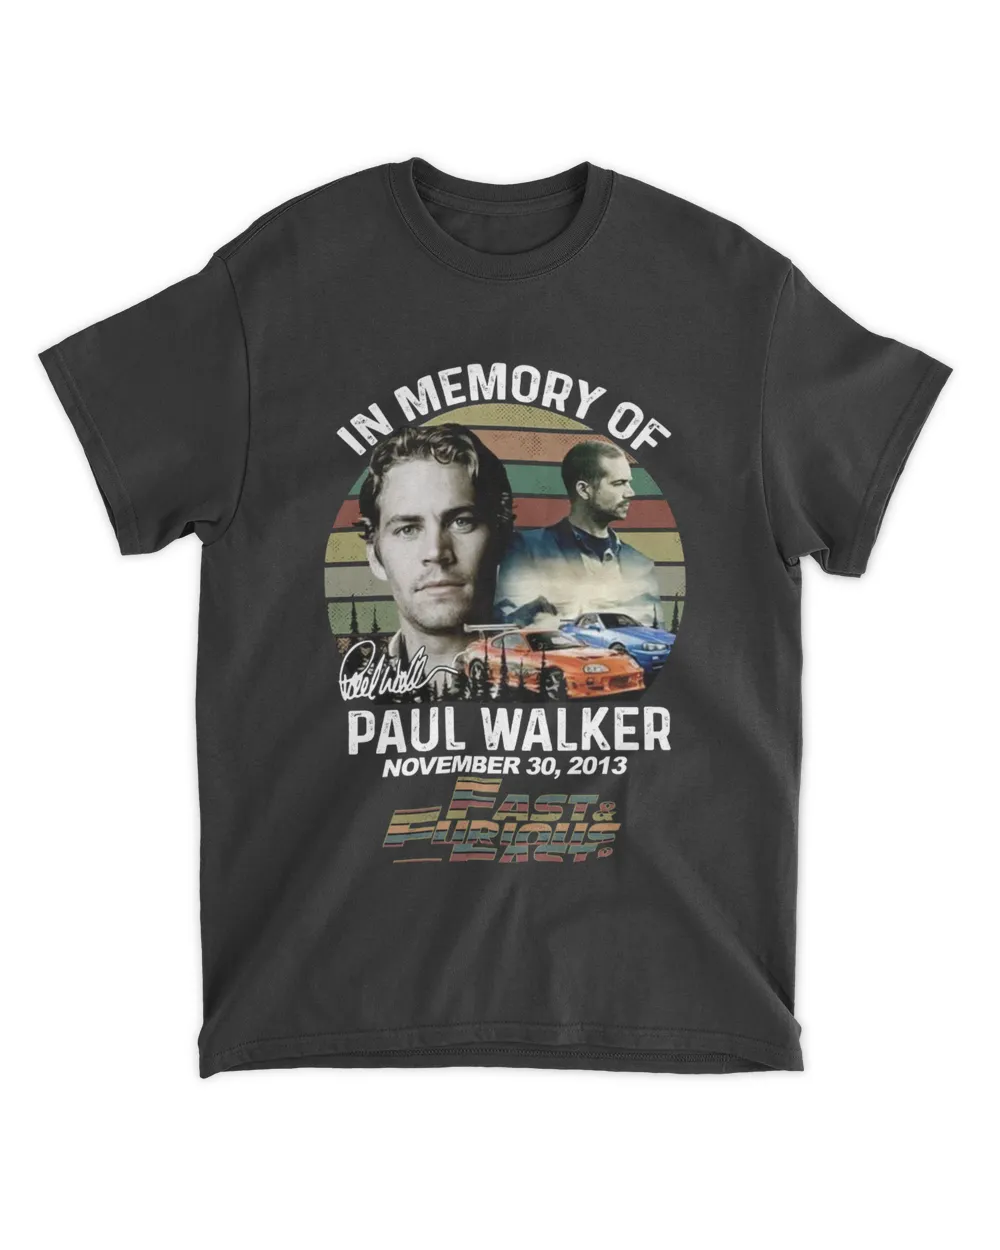 In memory of paul walker fast and furious legend retro signed for fan Tshirt Hoodie Sweater